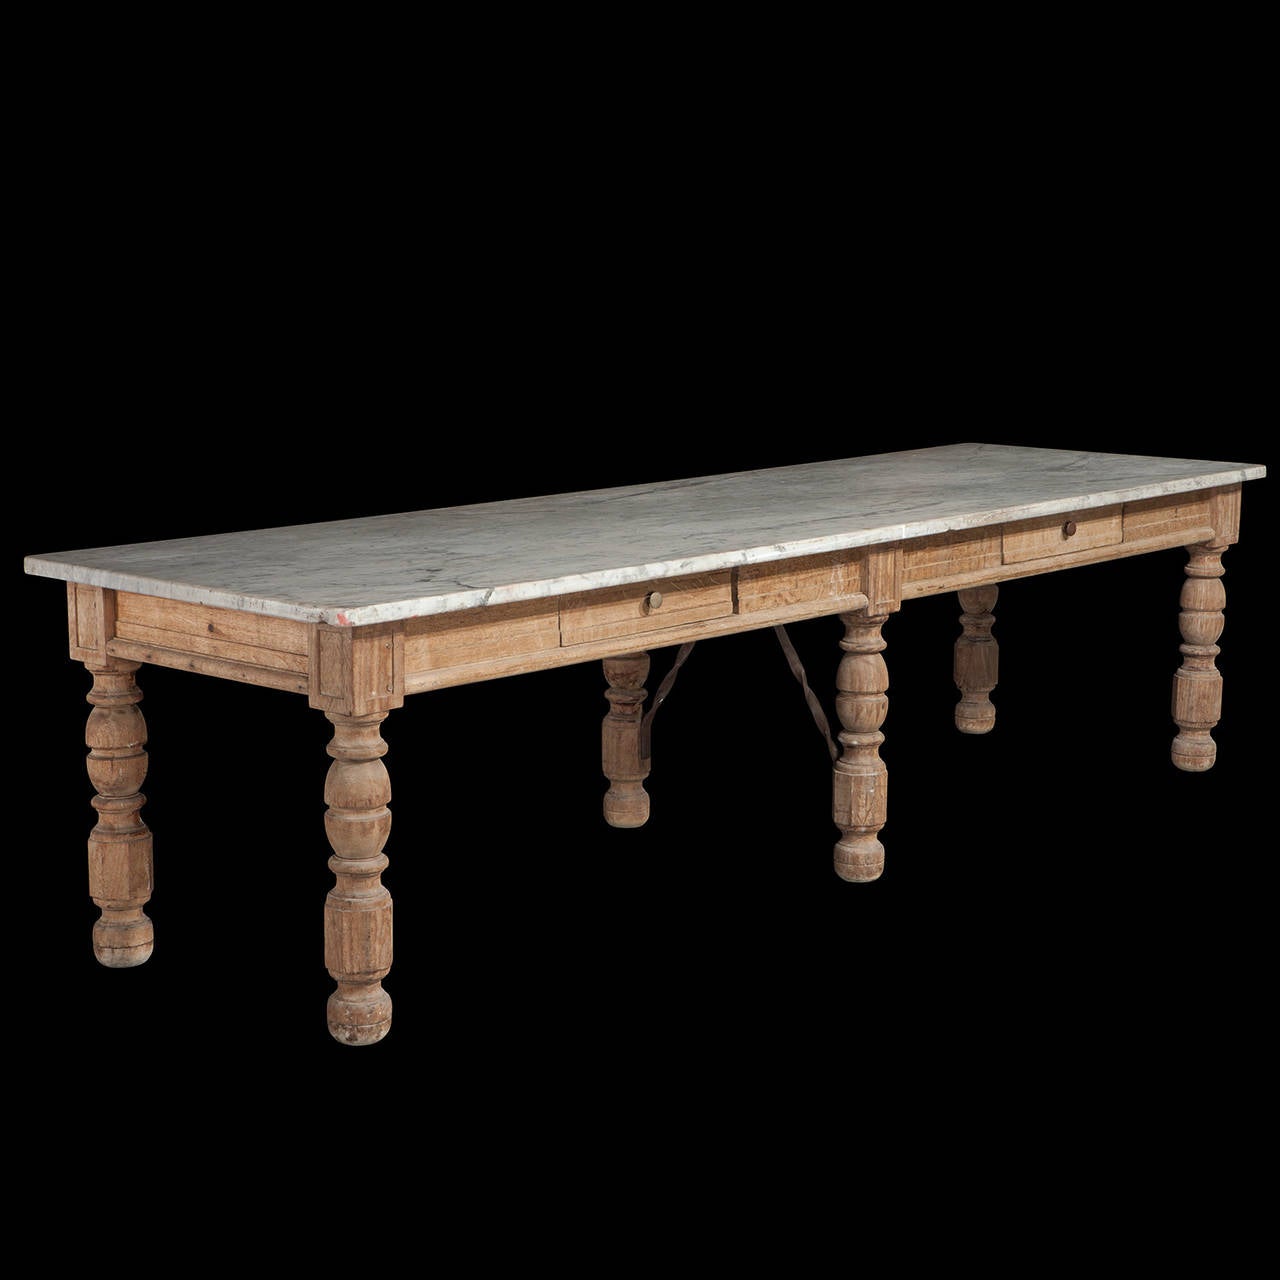 Solid oak frame with turned legs. The marble top provided a flat, cool surface for chocolate making.